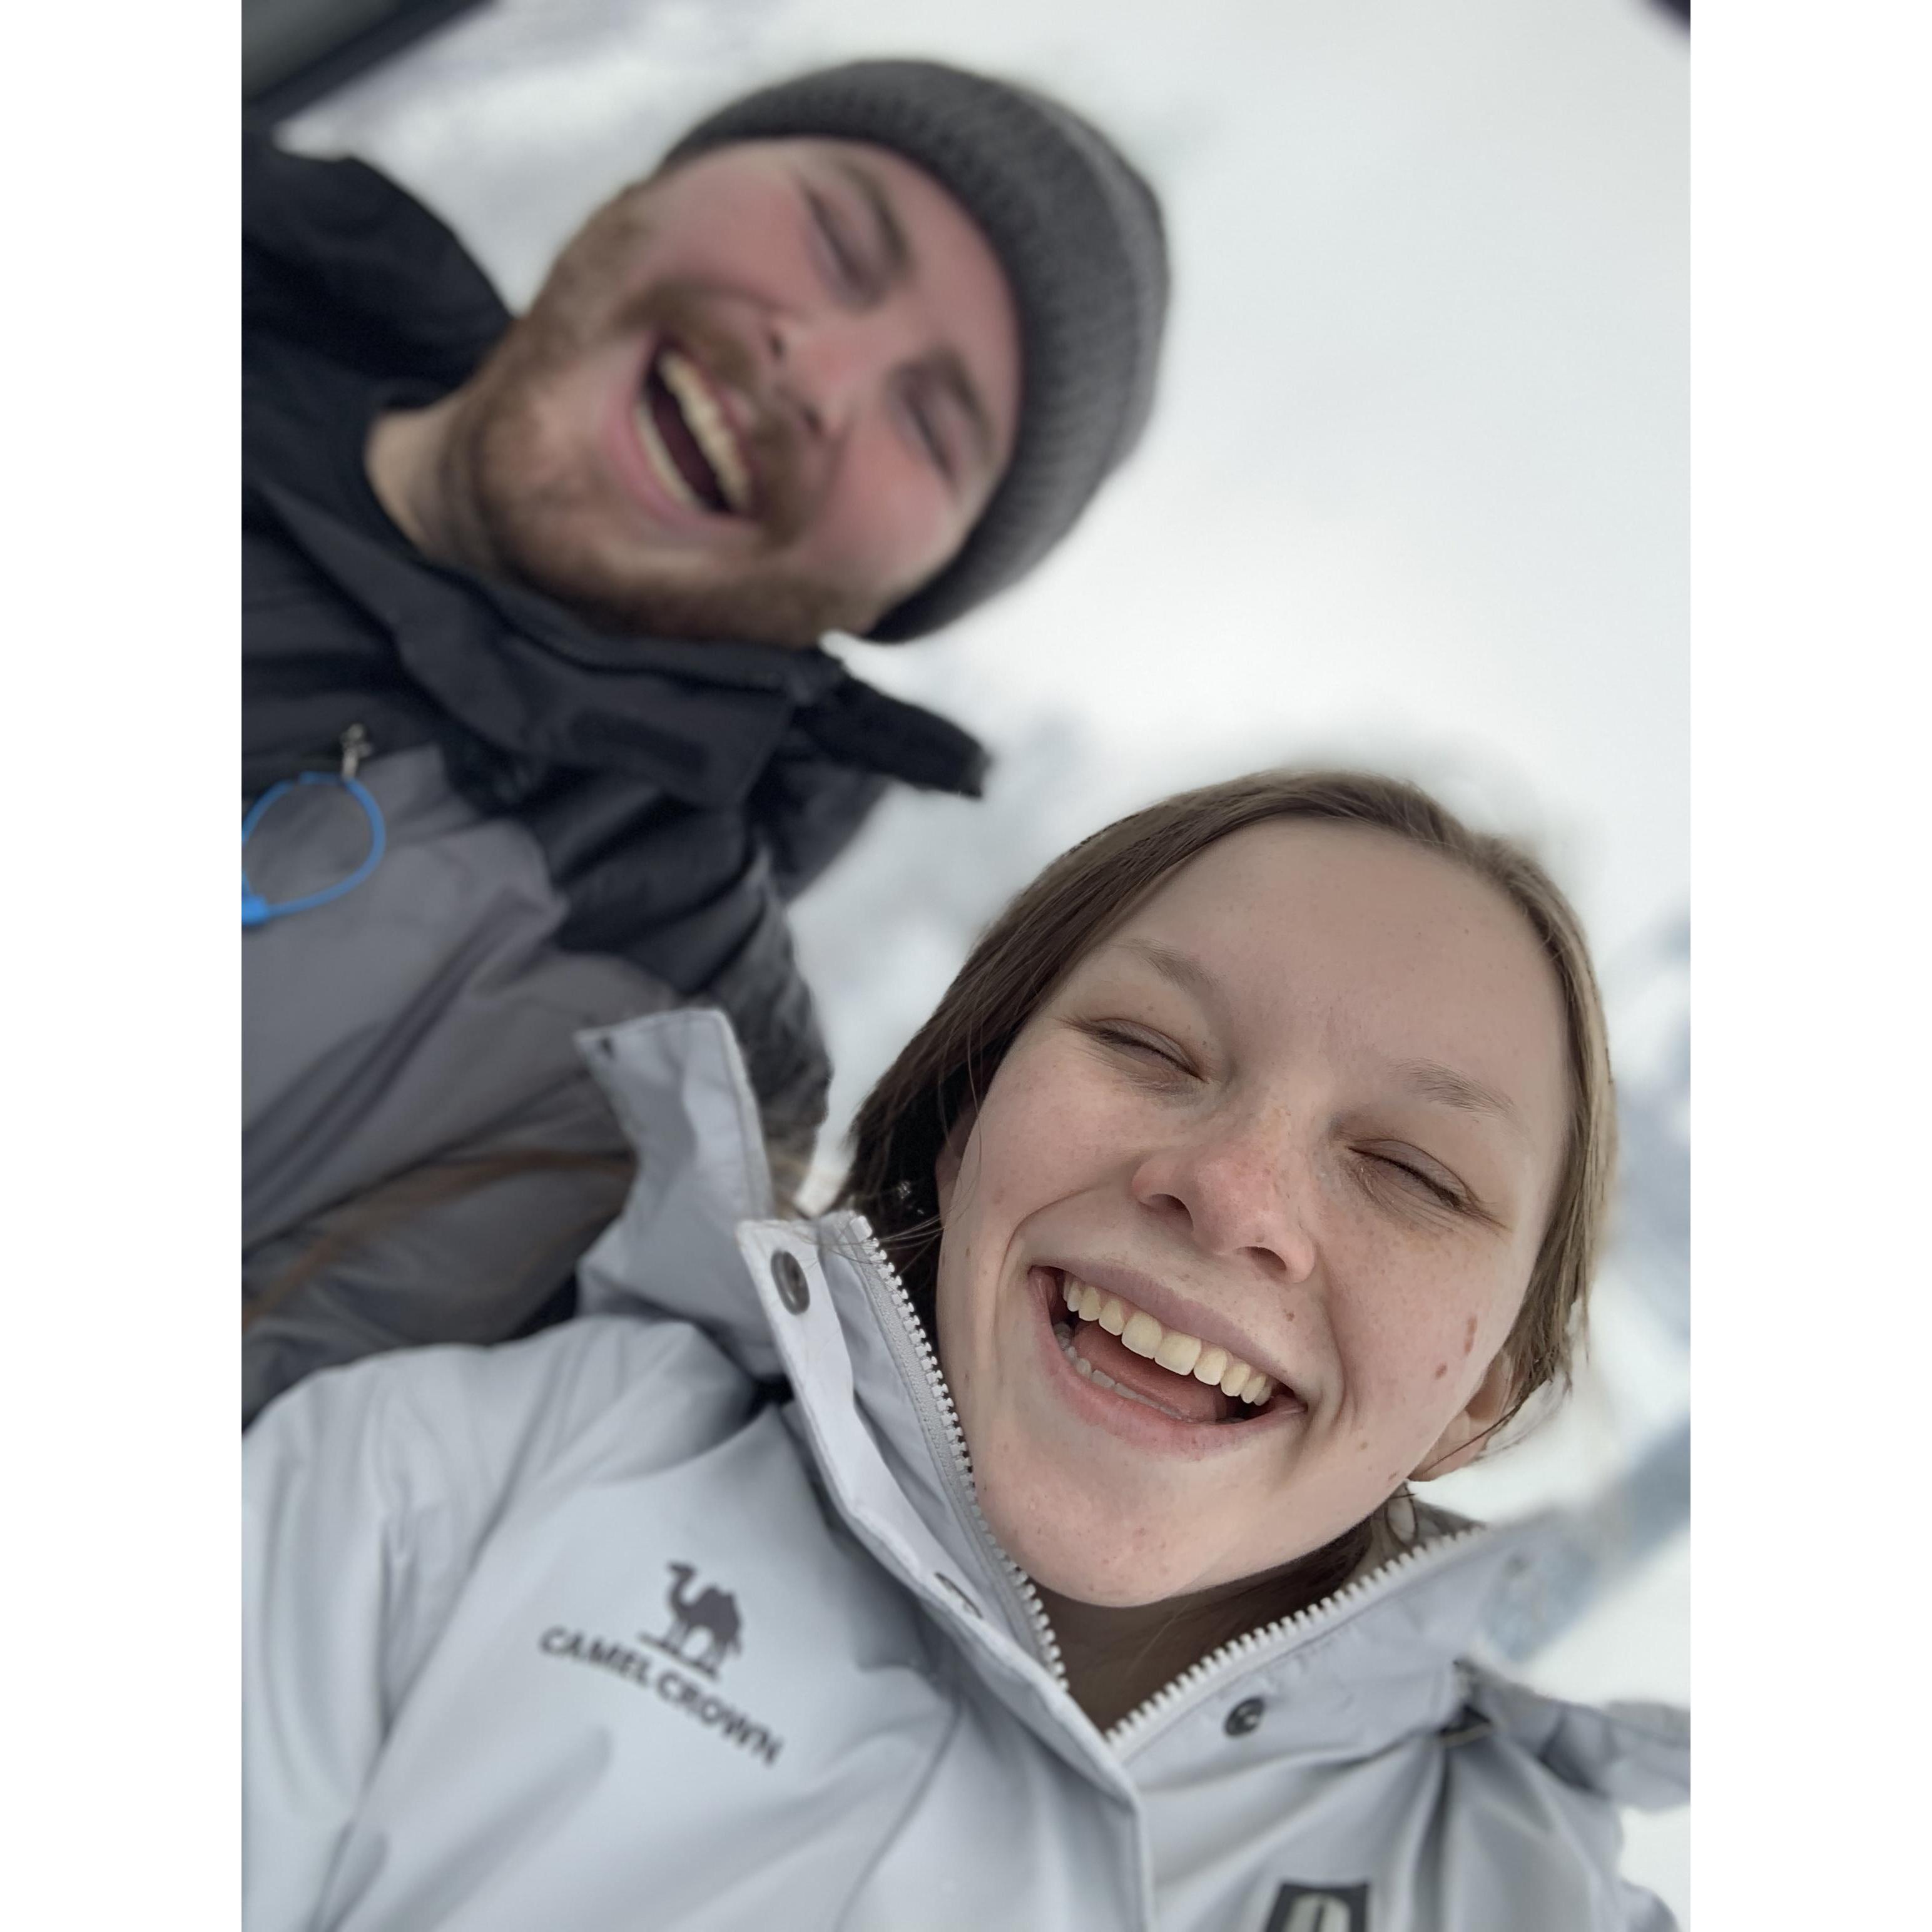 March 23, 2019 - Lake Tahoe ( Who knows what were laughing about)